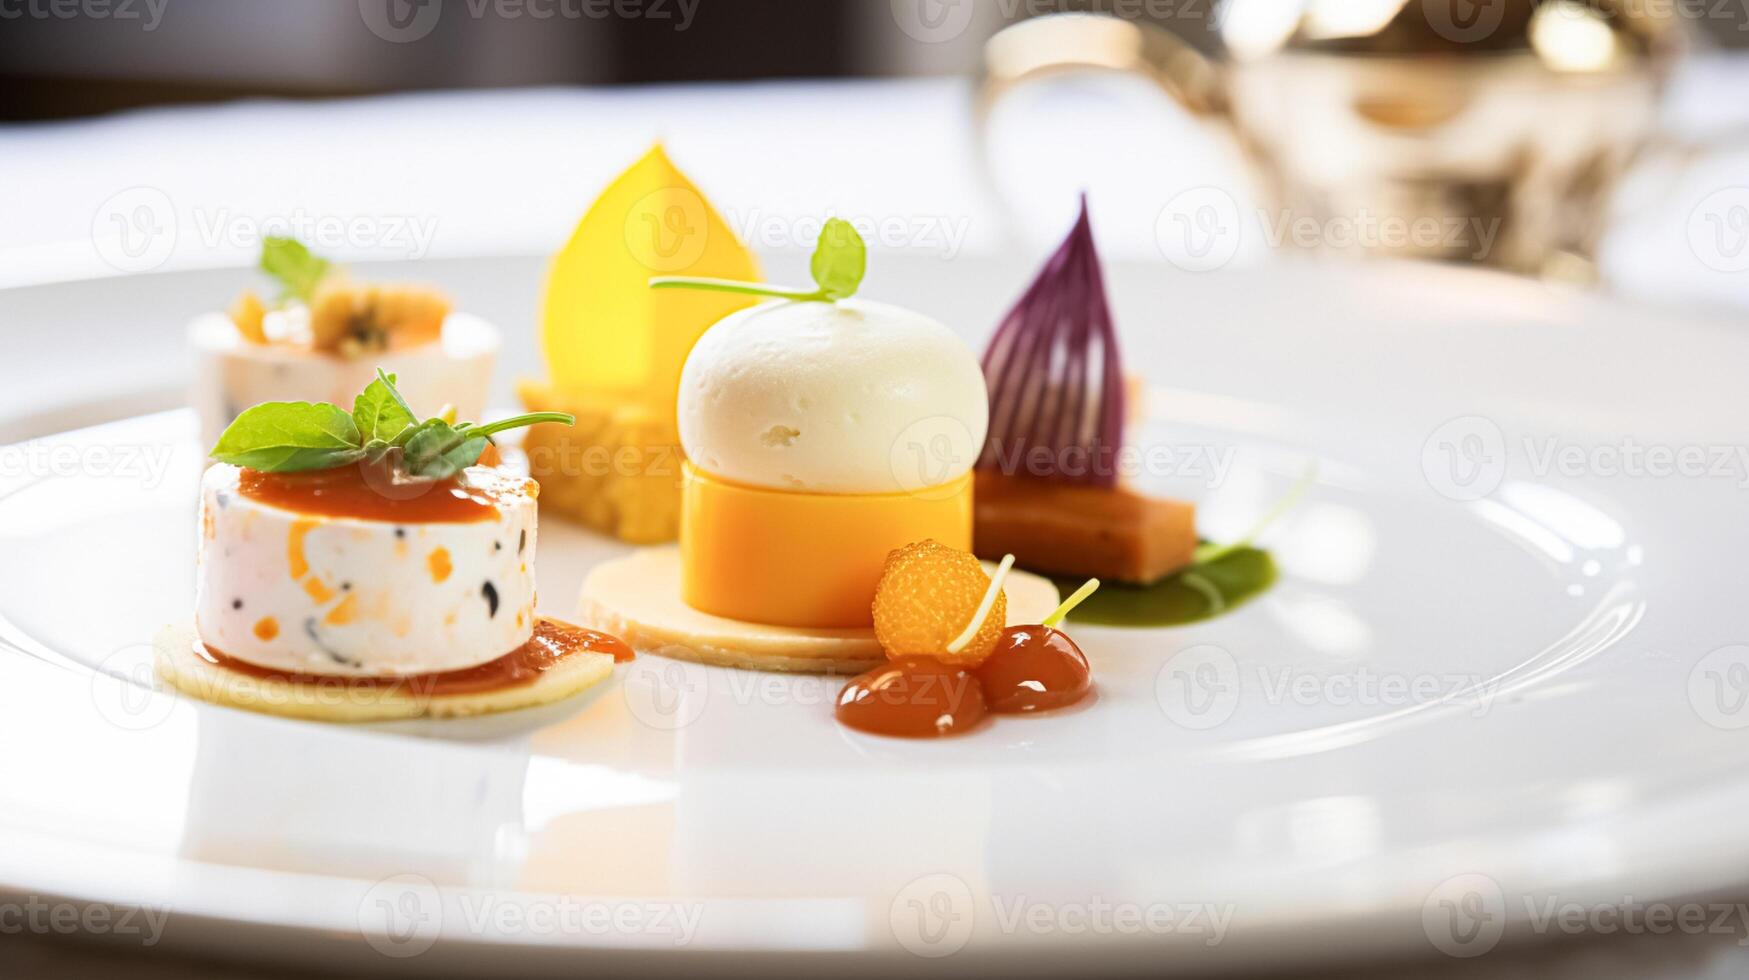 AI generated Food, hospitality and room service, starter appetisers as English countryside exquisite cuisine in hotel restaurant a la carte menu, culinary art and fine dining photo